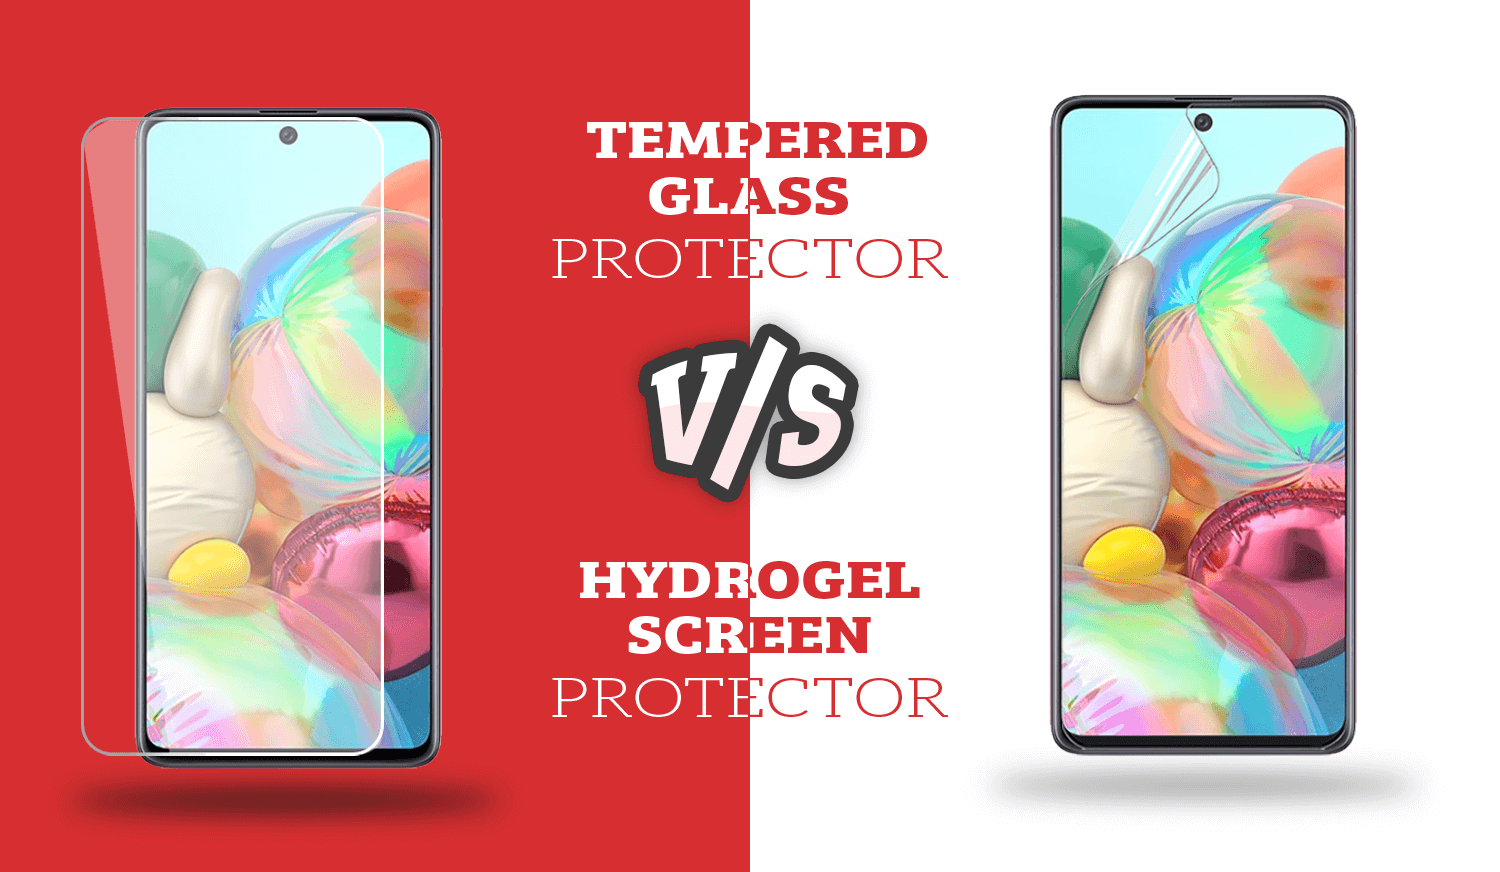 hydrogel screen protector vs tempered glass